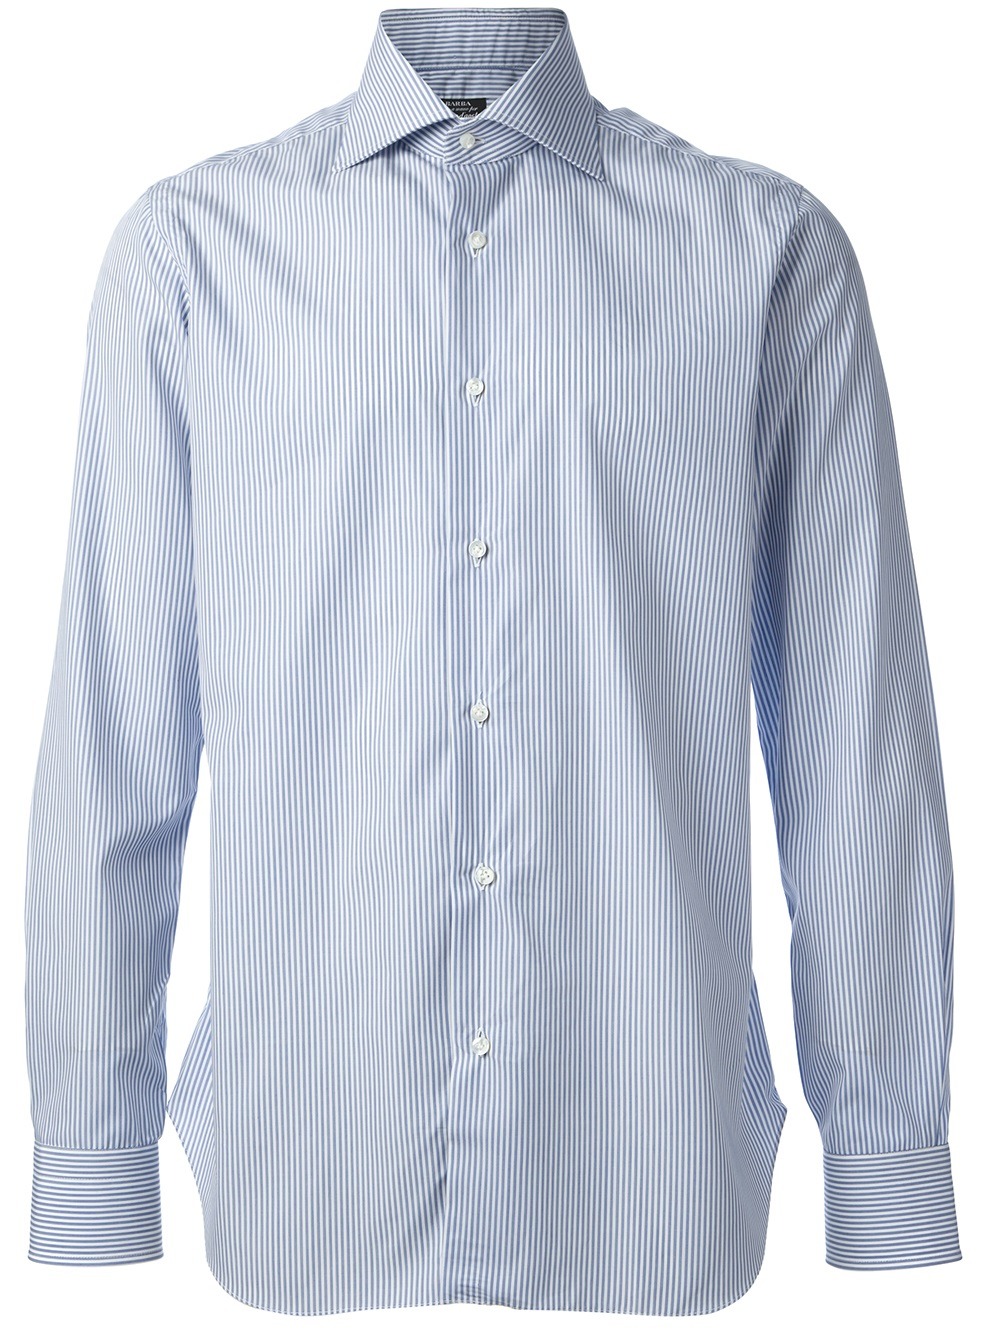 It’s on Sale: Barba shirts at Farfetch – Put This On